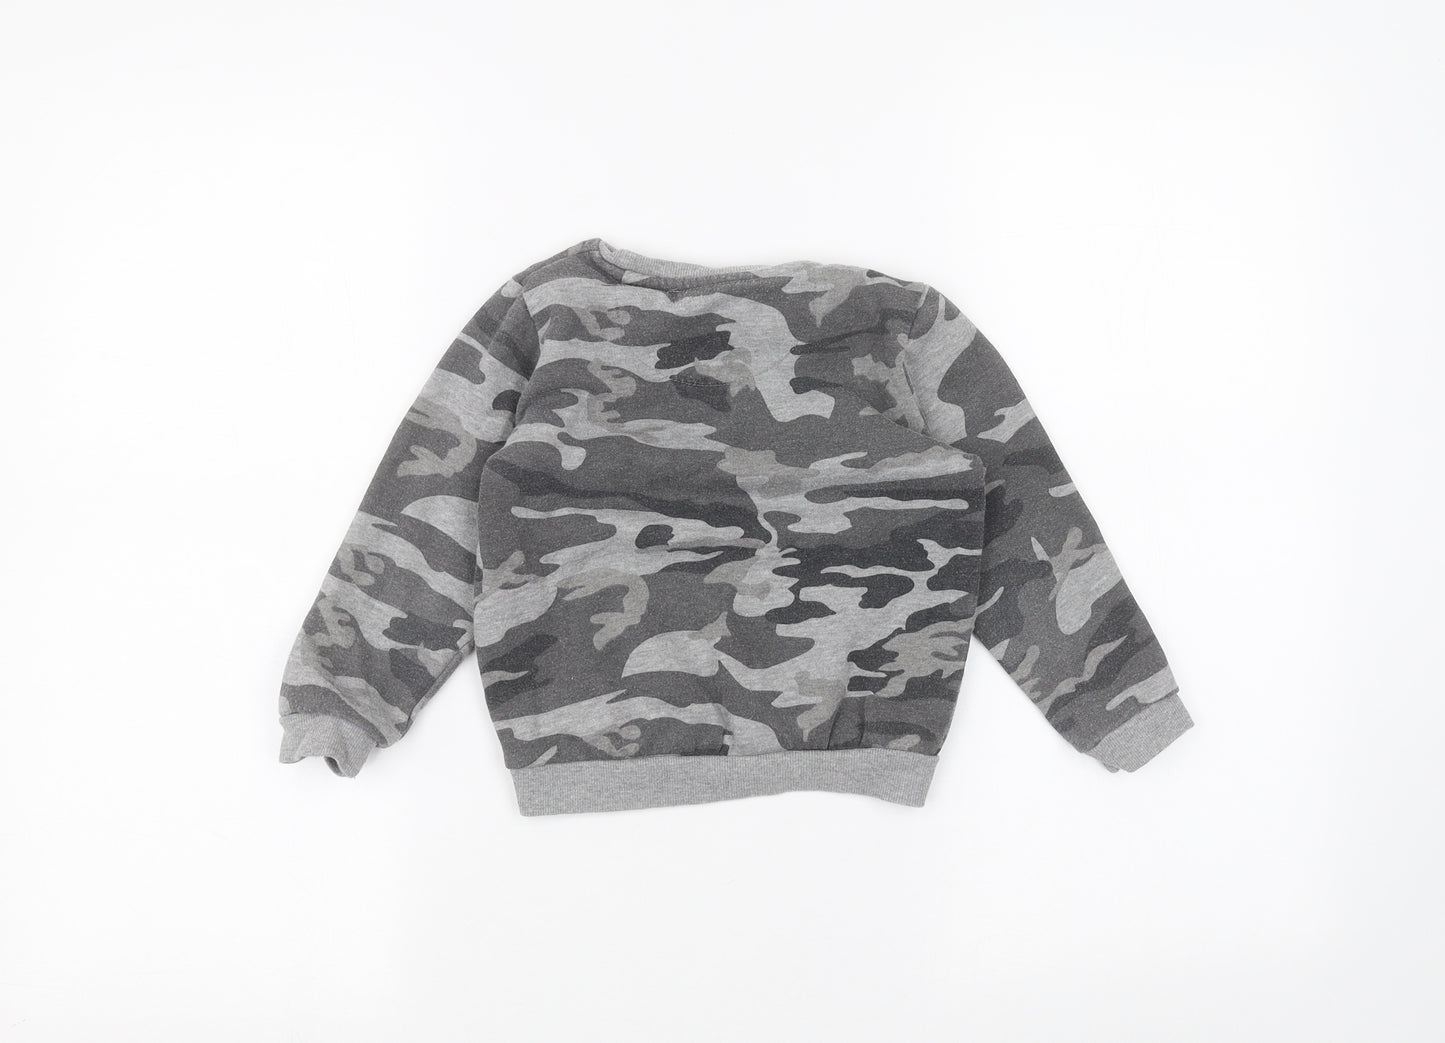 Primark Boys Grey Camouflage  Pullover Jumper Size 3-4 Years